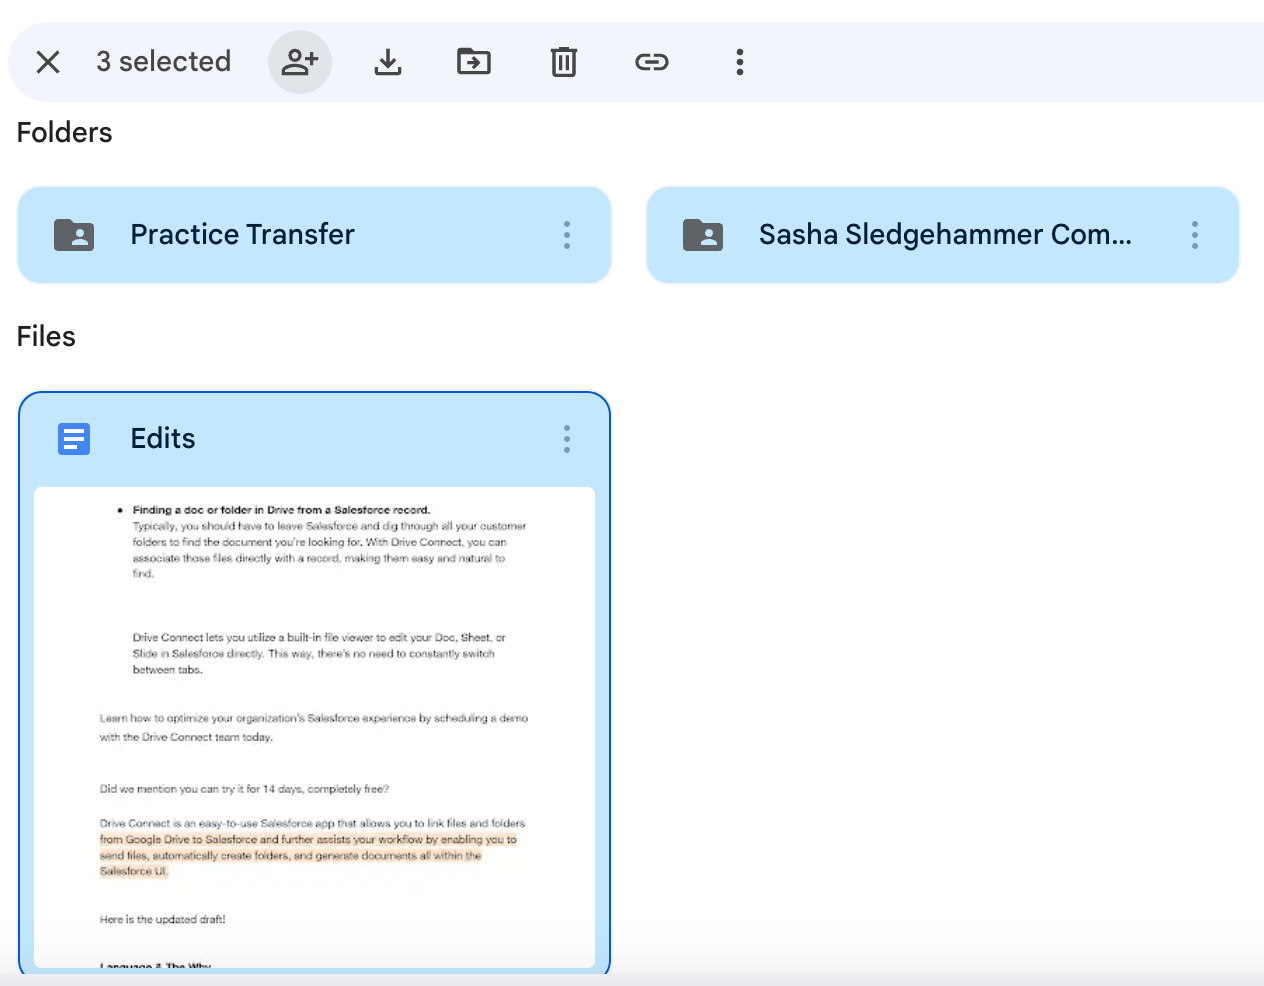 Multiple documents and folders within the transferred Google Drive folder are highlighted with the share button at the top emphasized. Indicating you can alter the sharing permissions of all these items with a single action.